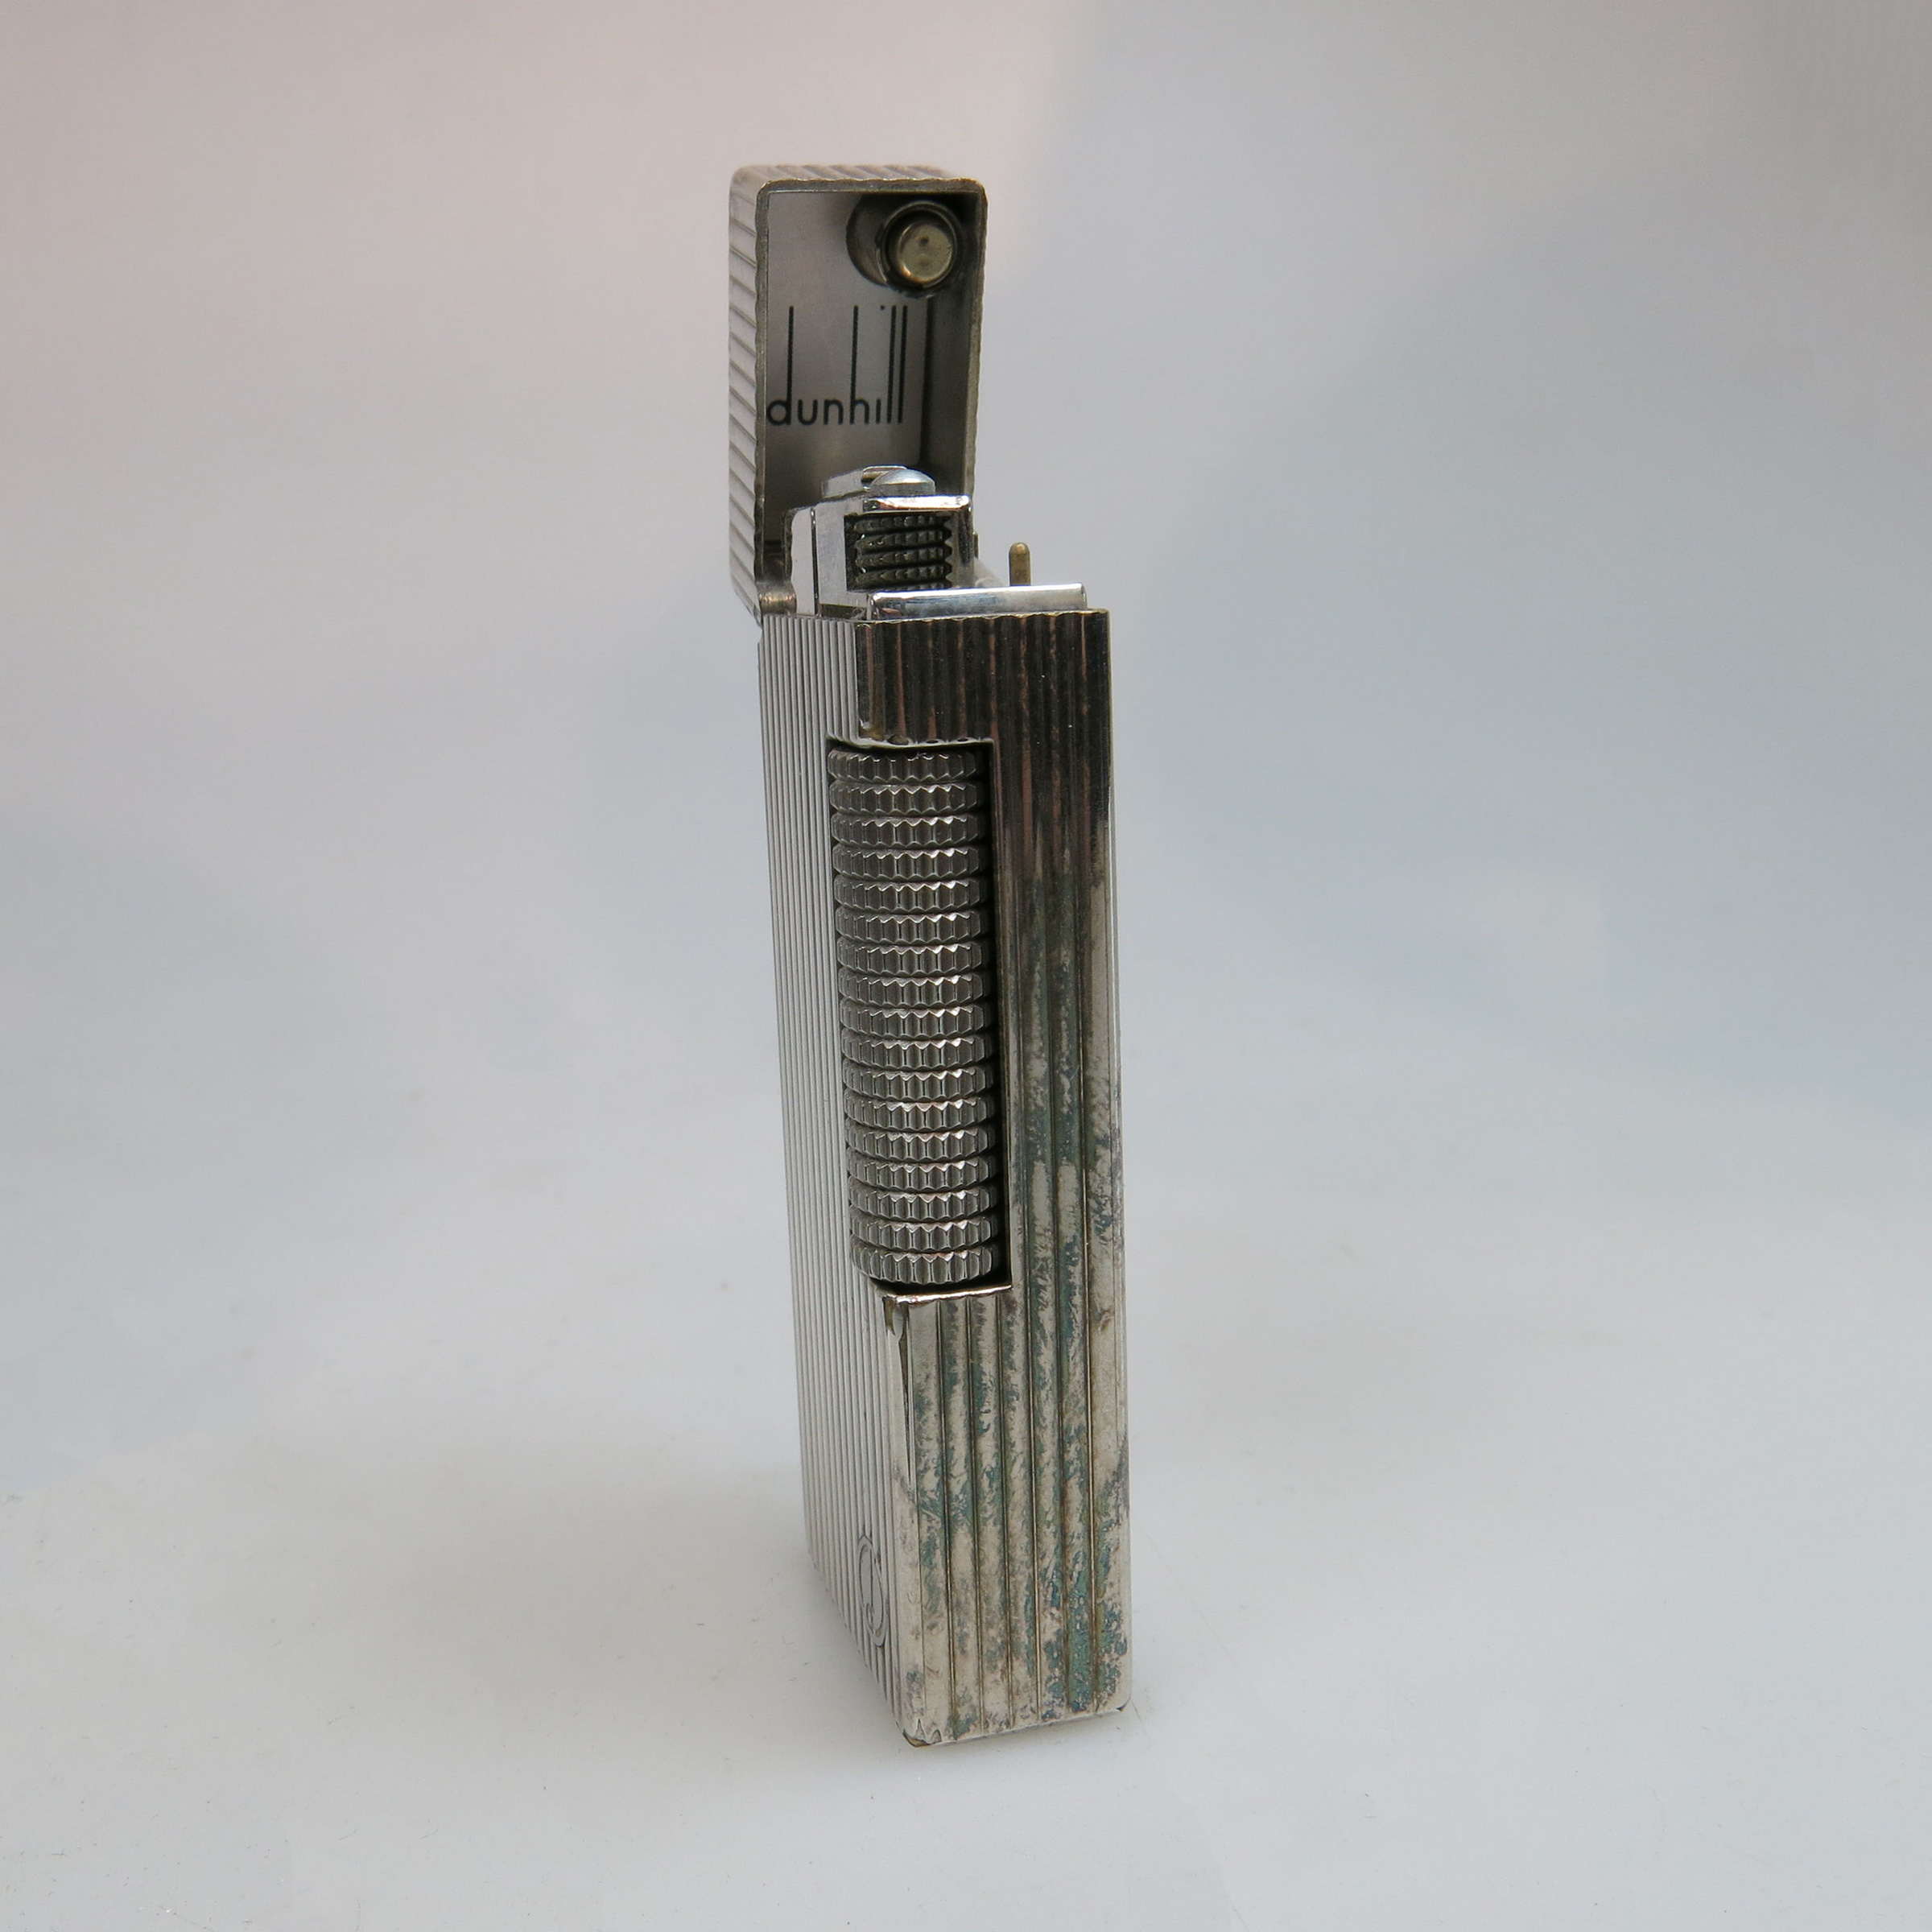 Dunhill Rollgas Silver-Plated Lighter